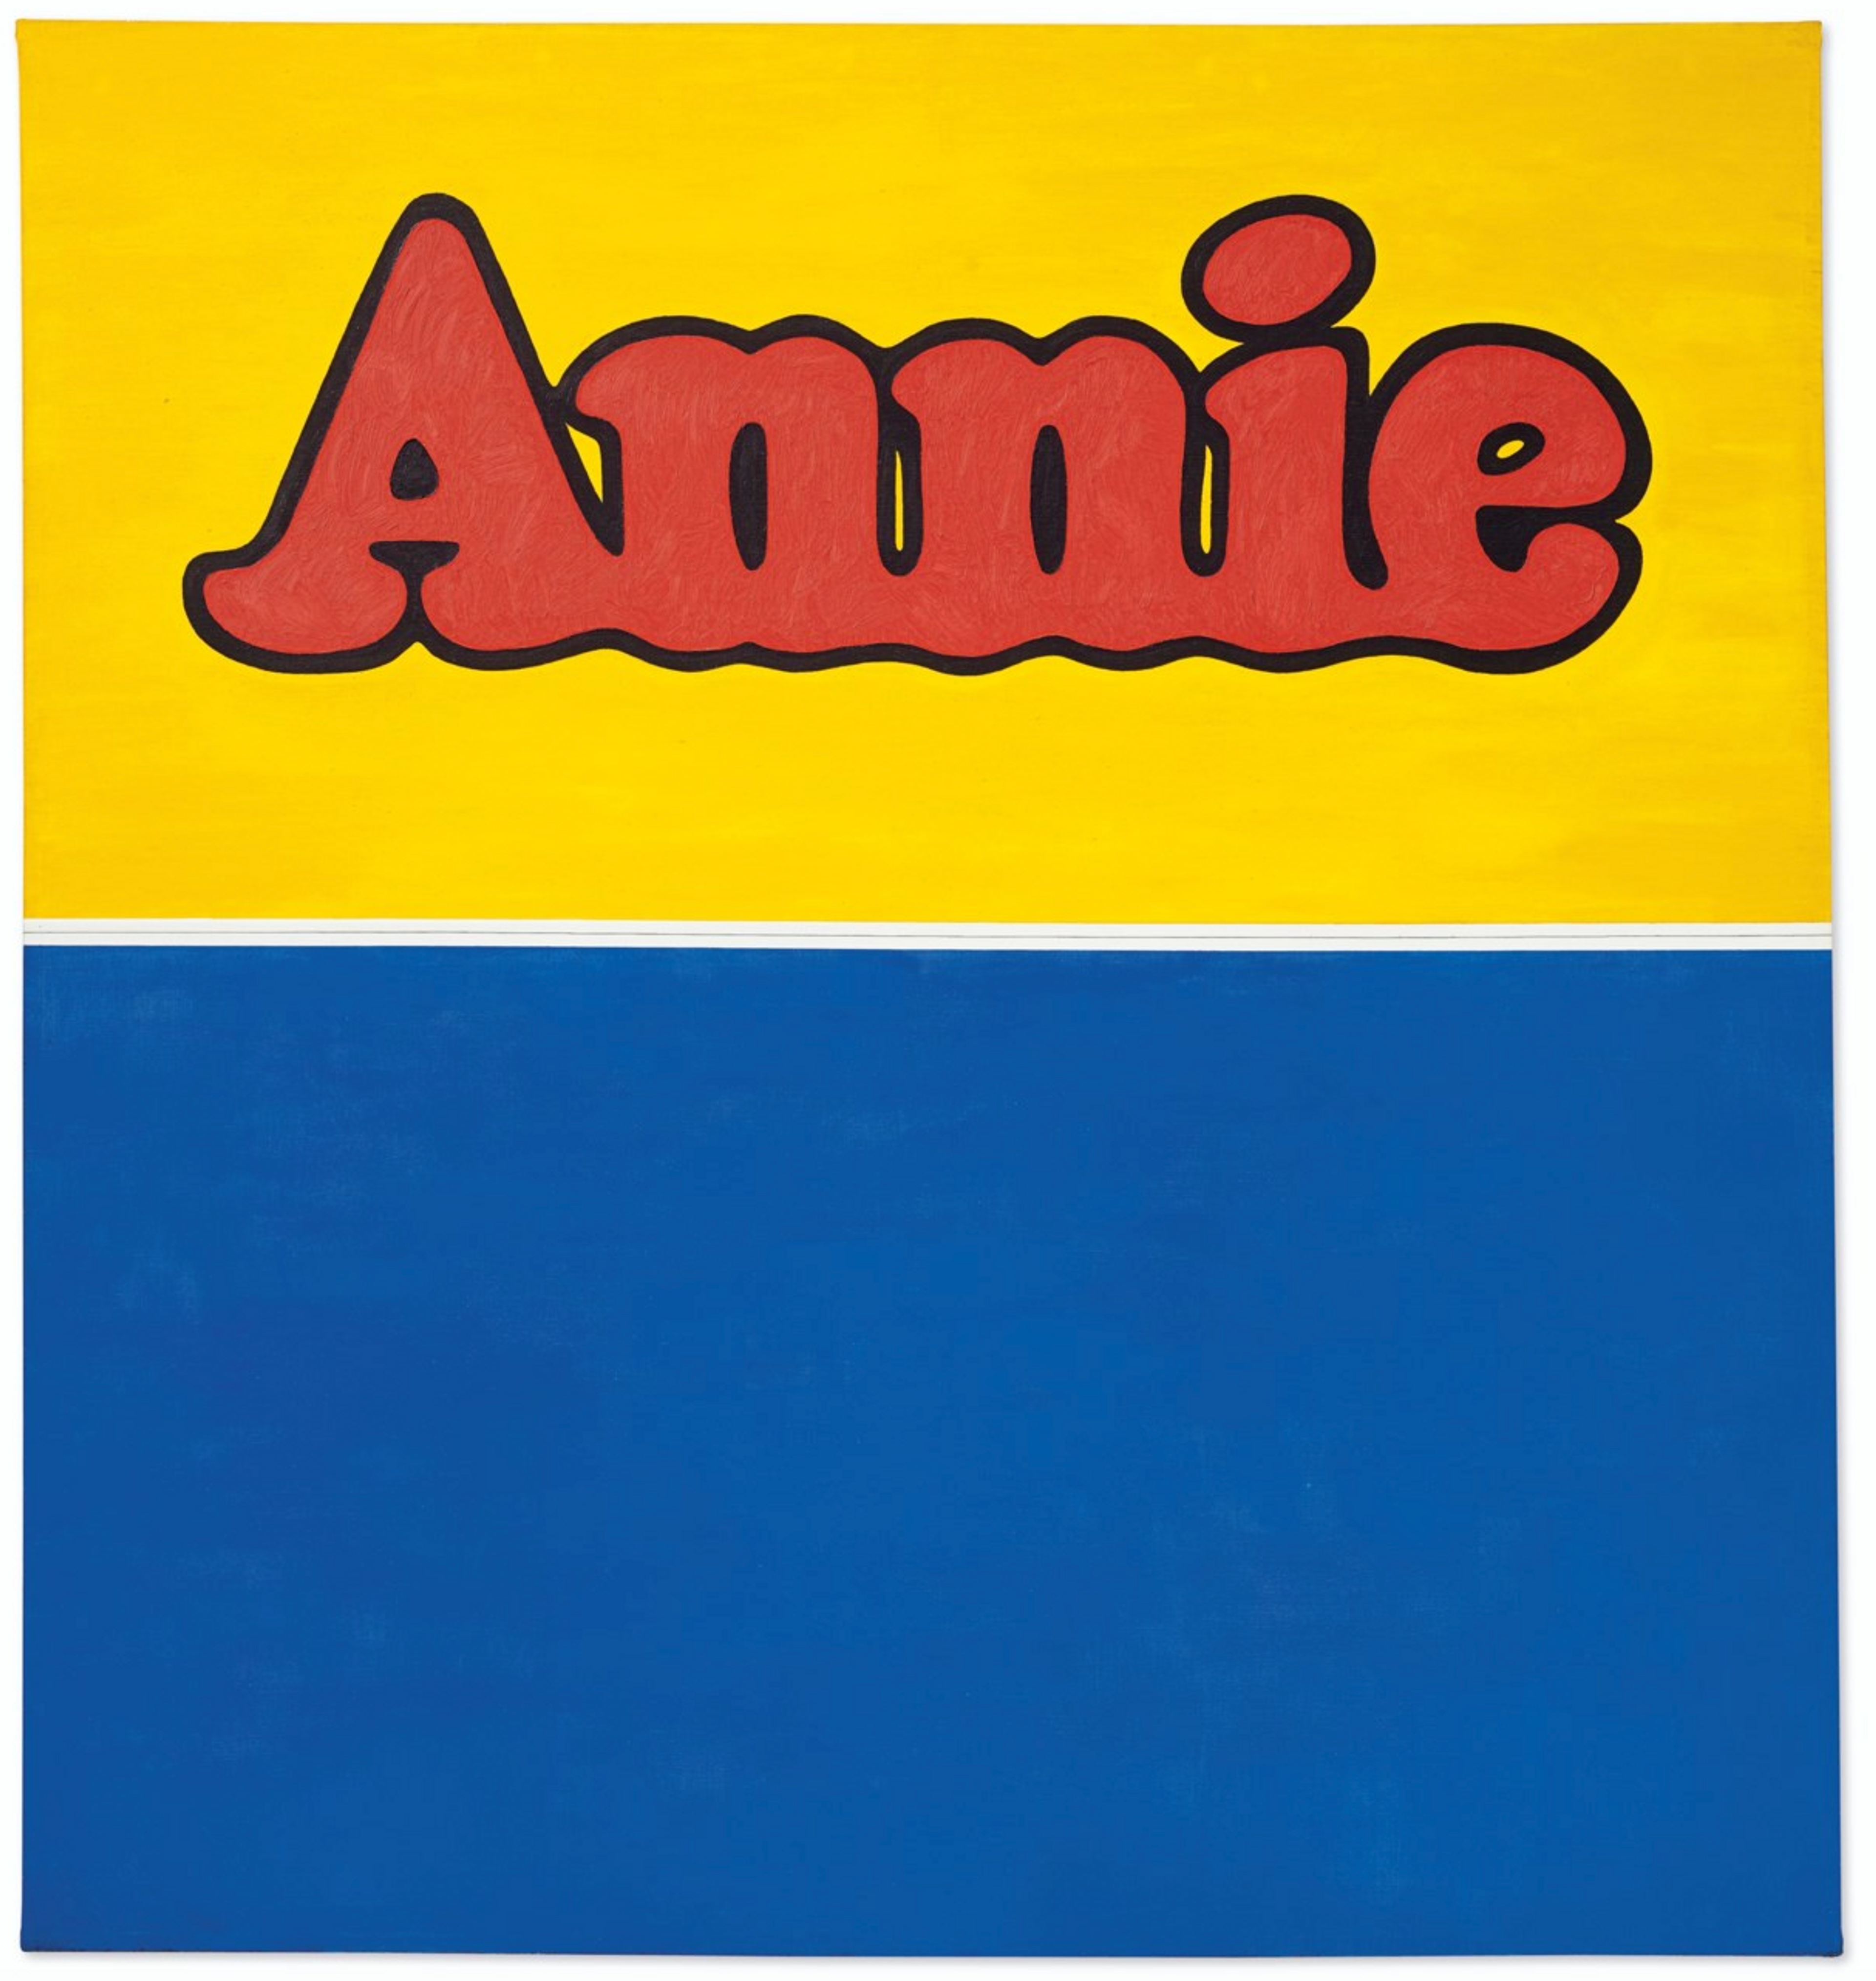 Painting of the word 'Annie' by Ed Ruscha in red lettering with a black outline. The background is yellow in the top half and blue in the bottom half.